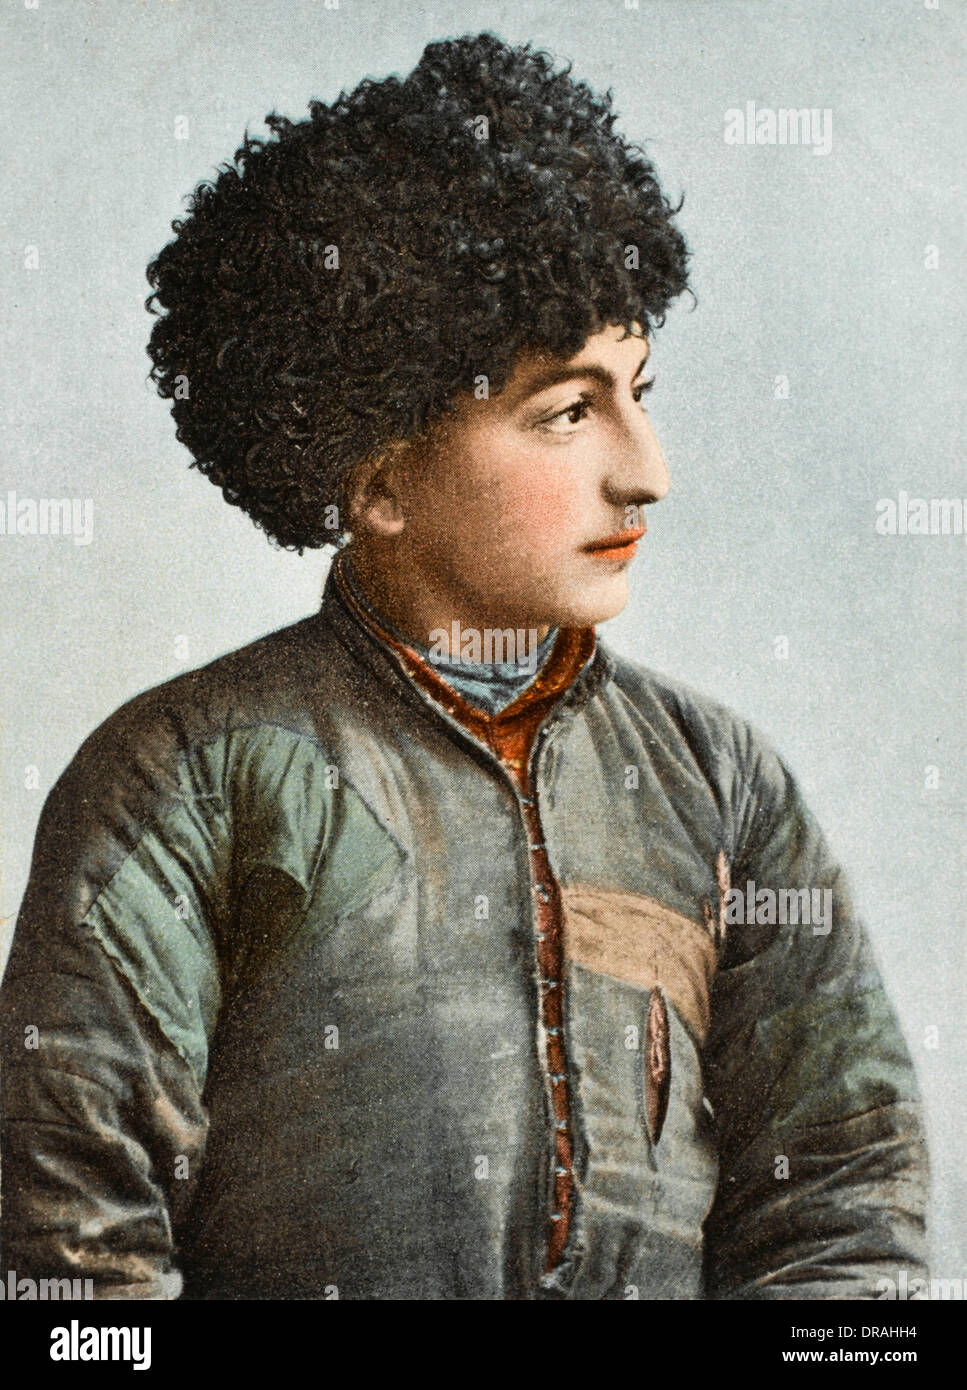 Young Lezgin man in traditional costume Stock Photo